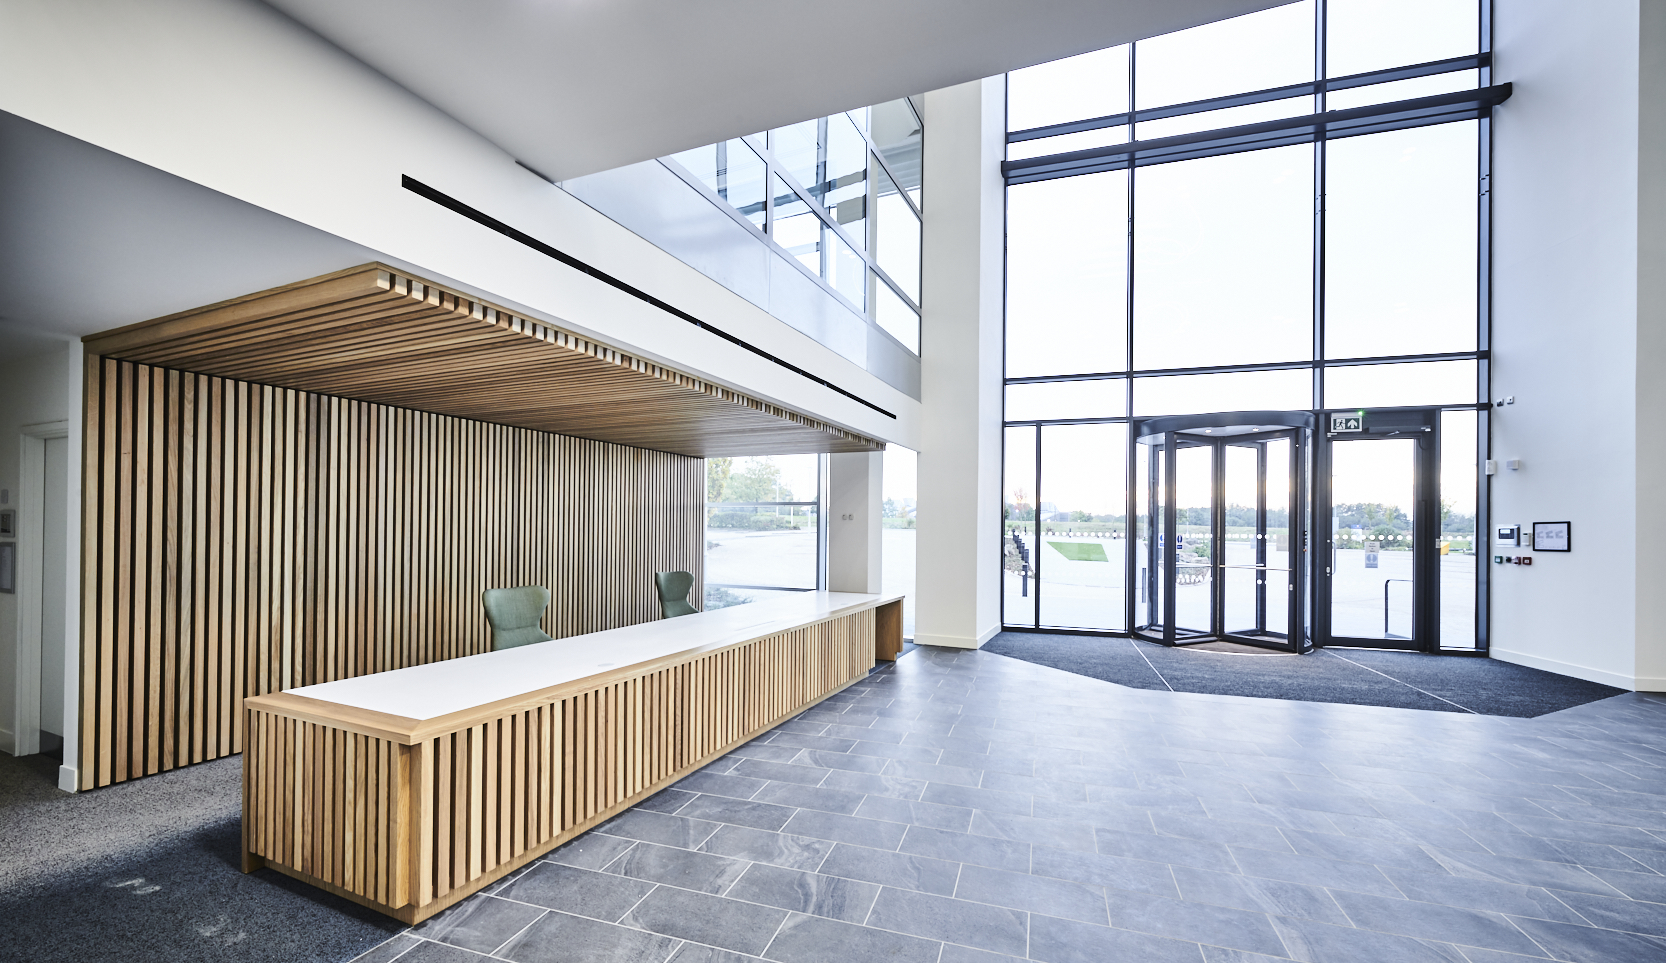 Exploring Key Aspects to Consider When Specifying Automatic Doors